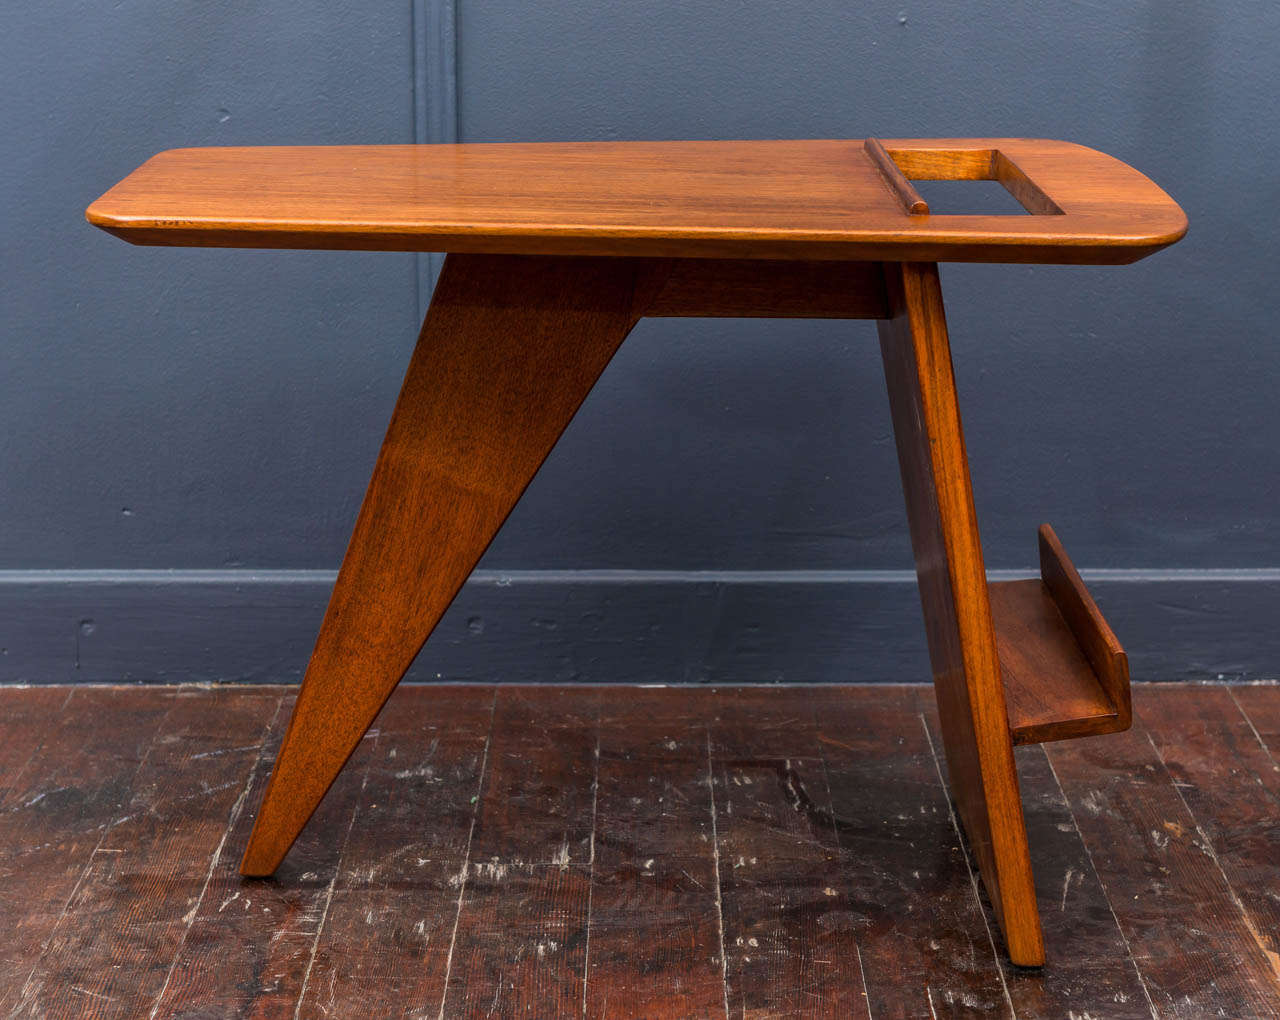 Rare and important iconic design by Jens Risom, completely restored in perfect condition.